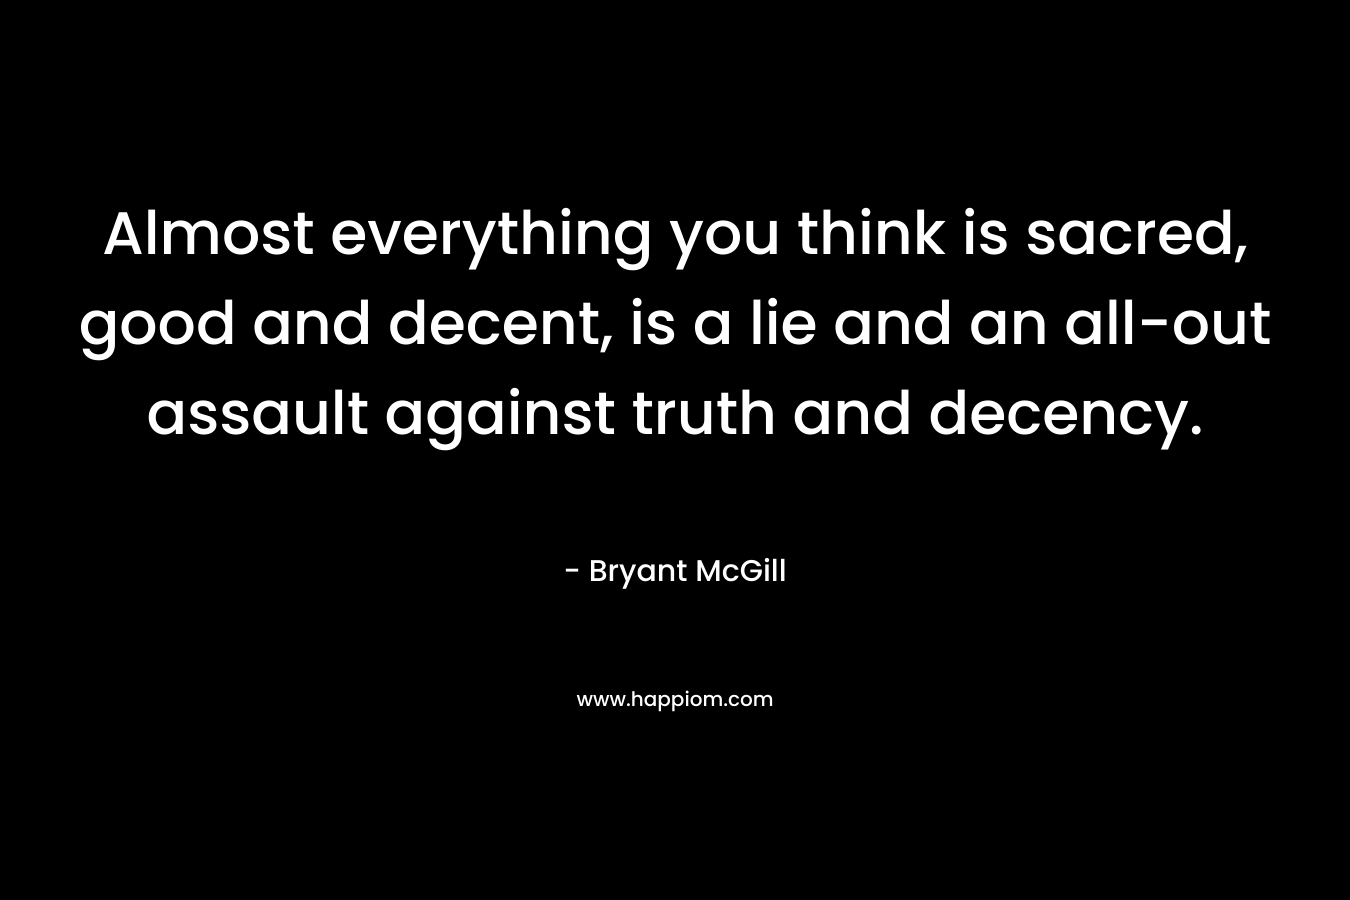 Almost everything you think is sacred, good and decent, is a lie and an all-out assault against truth and decency.